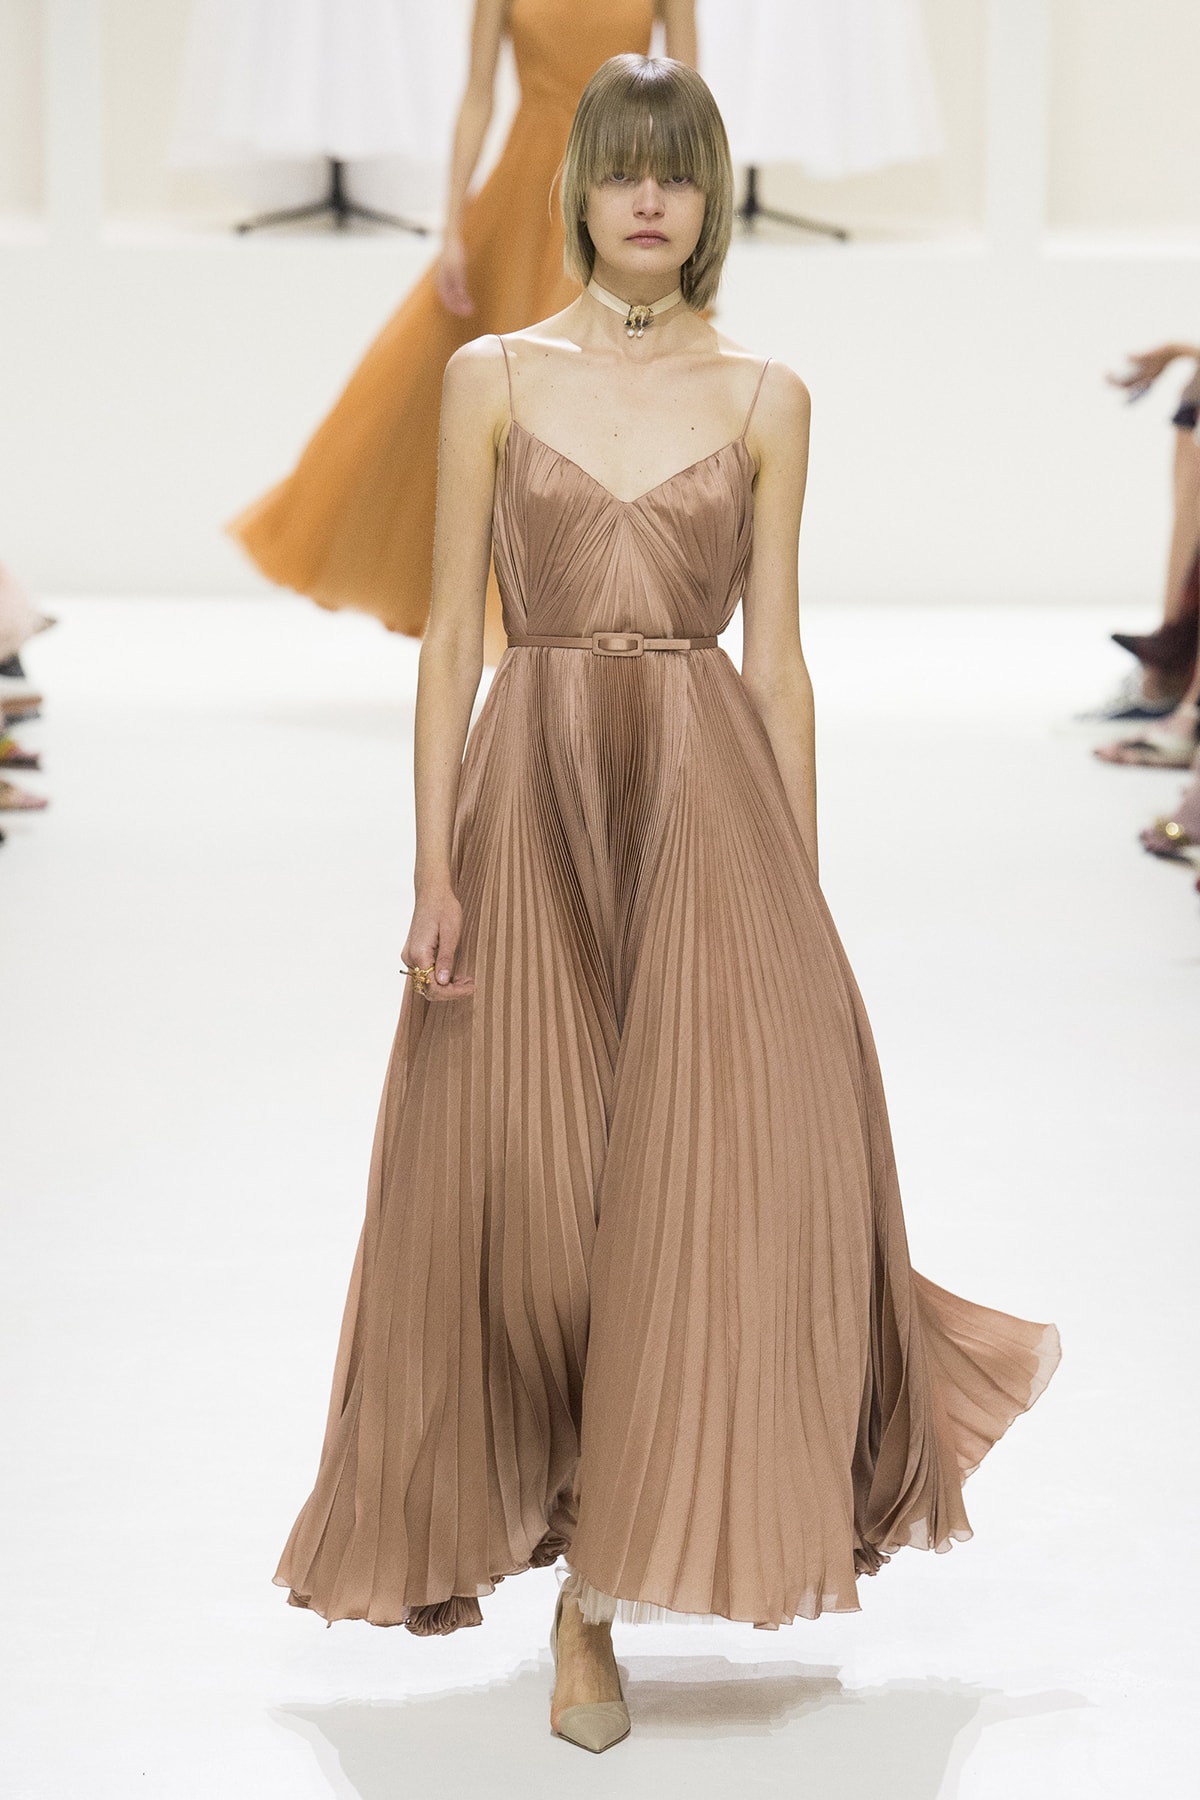 Christian Dior Fall 2018 Couture Show Collection